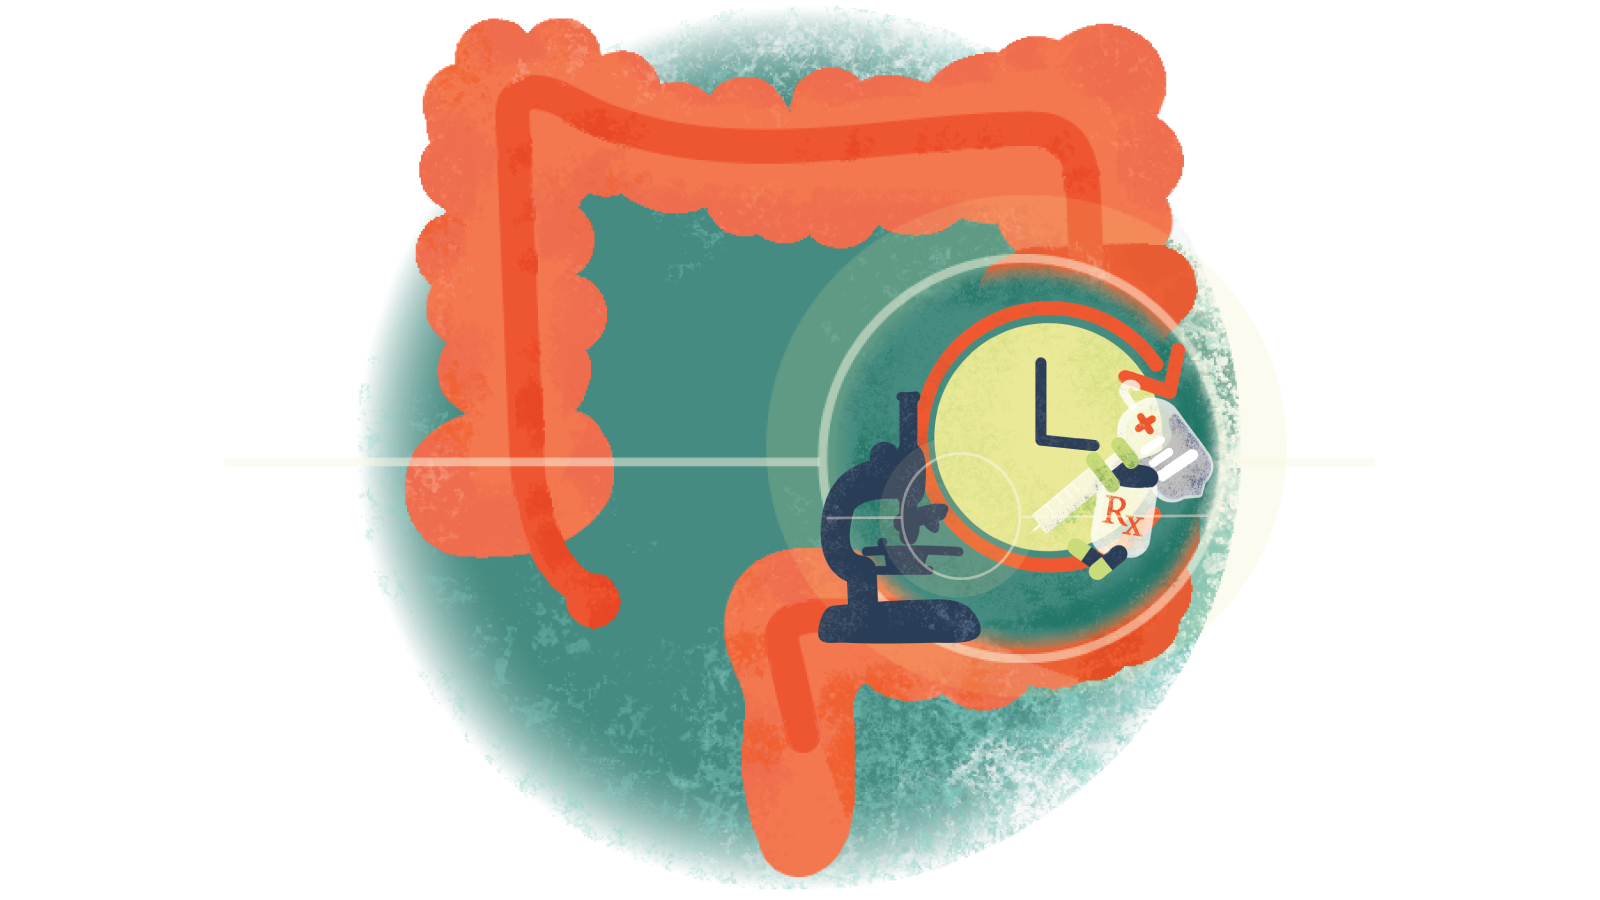 Illustration of pills, syringe, IV bag over a clock and microscope over a colon with ulcerative colitis